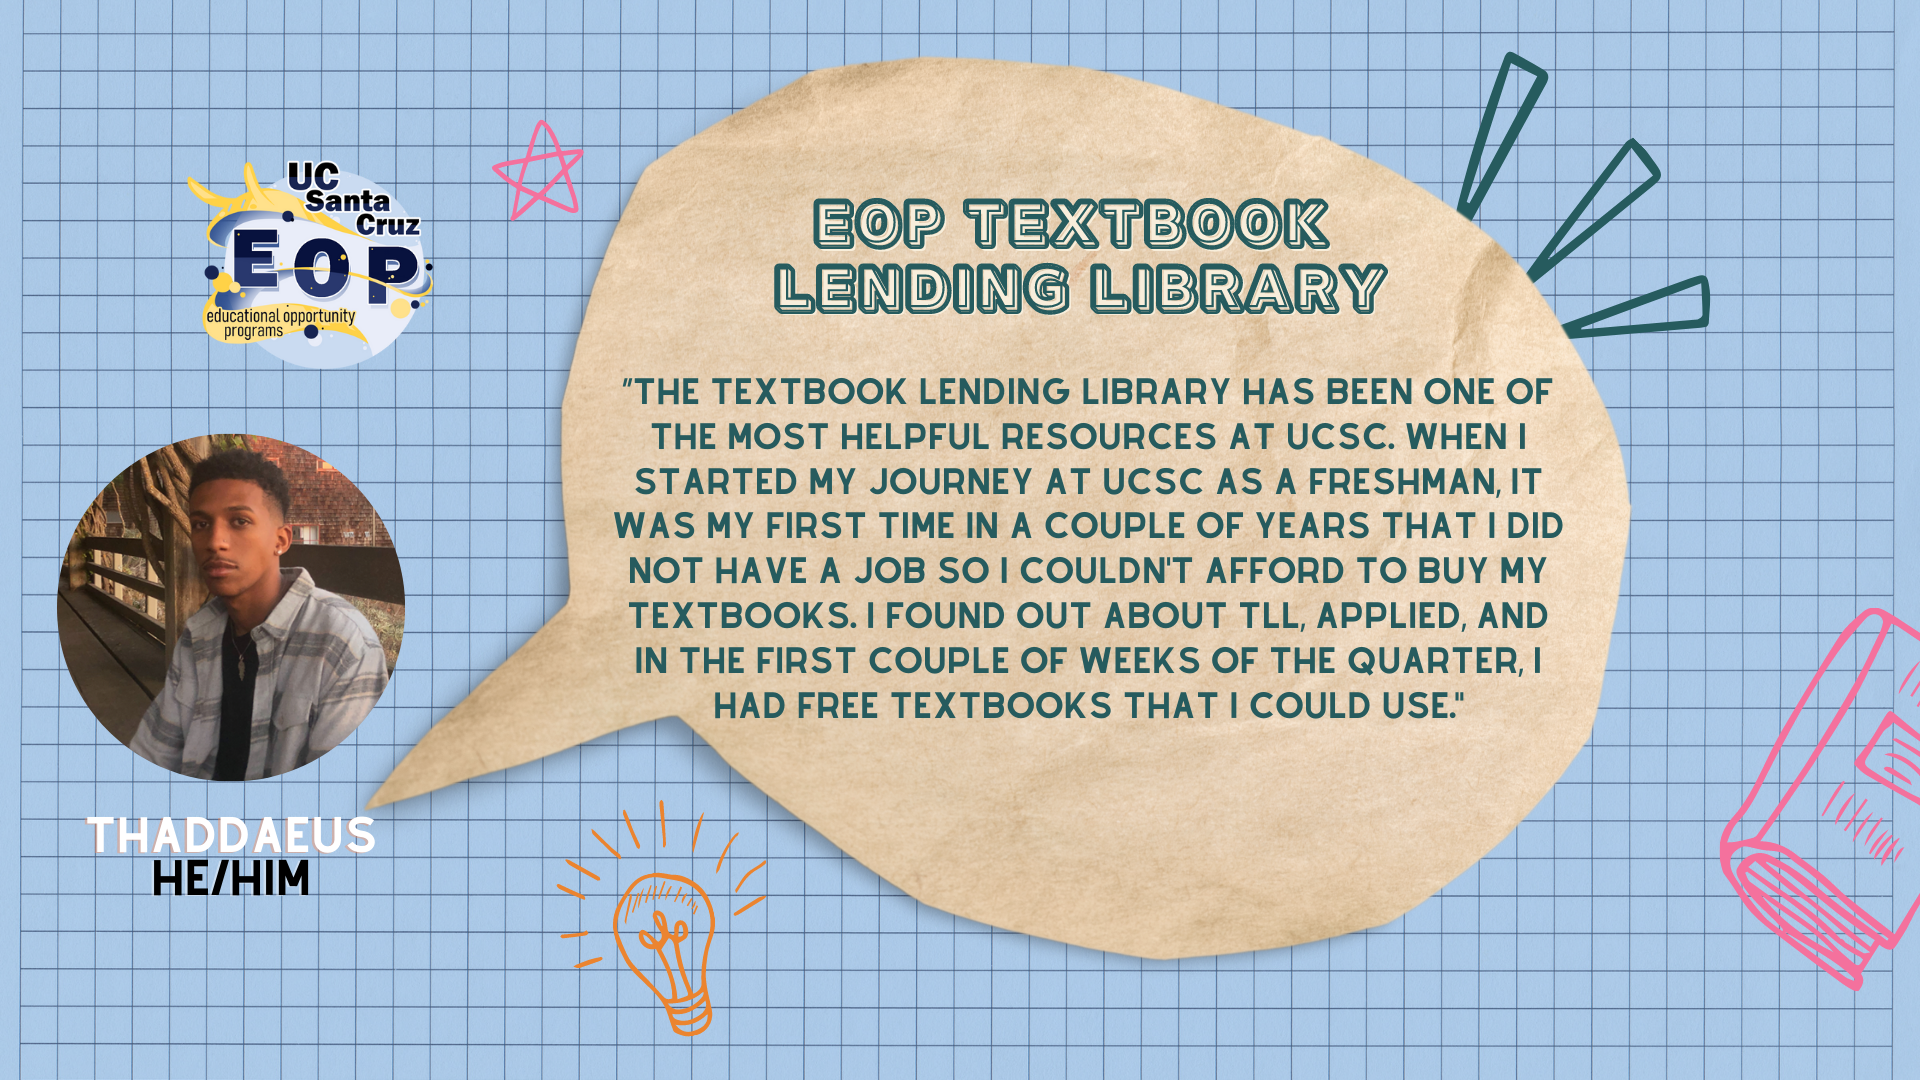 quote: “The Textbook Lending Library has been one of the most helpful resources at UCSC. When I started my journey at UCSC as a freshman, it was my first time in a couple of years that I did not have a job so I couldn't afford to buy my textbooks. I found out about TLL, applied, and in the first couple of weeks of the quarter, I had free textbooks that I could use."